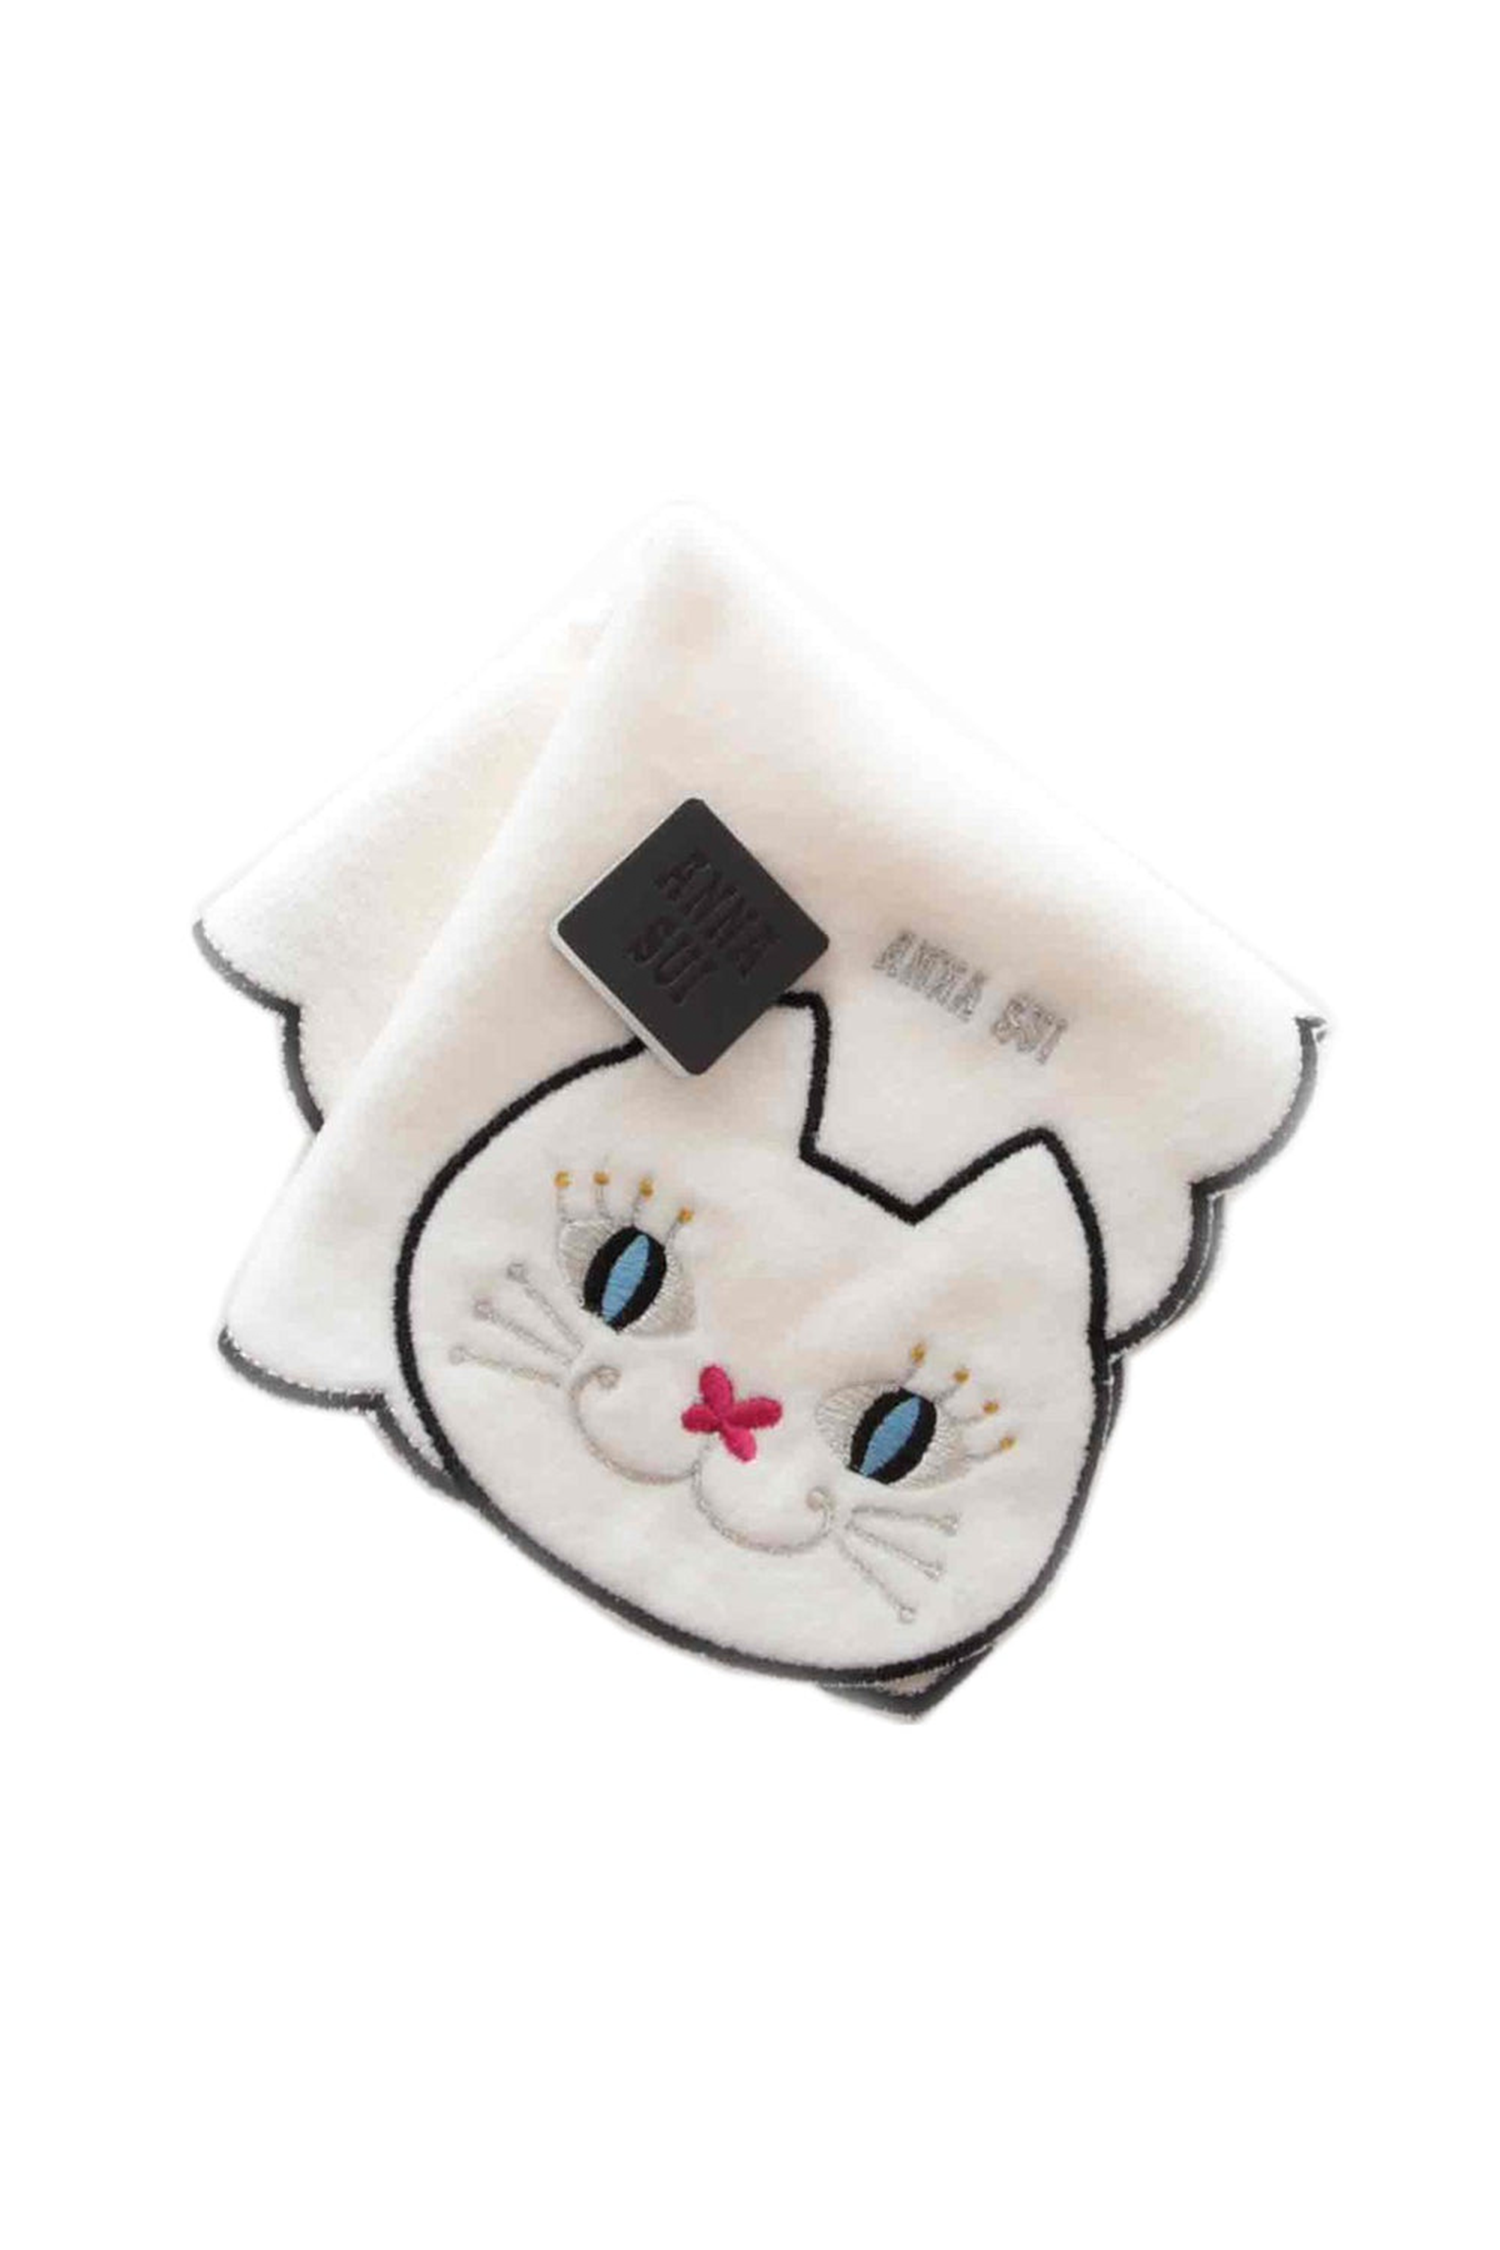 White washcloth, wavy hems, cat with black borders, blue eyes, red nose, Anna Sui in a grey tag